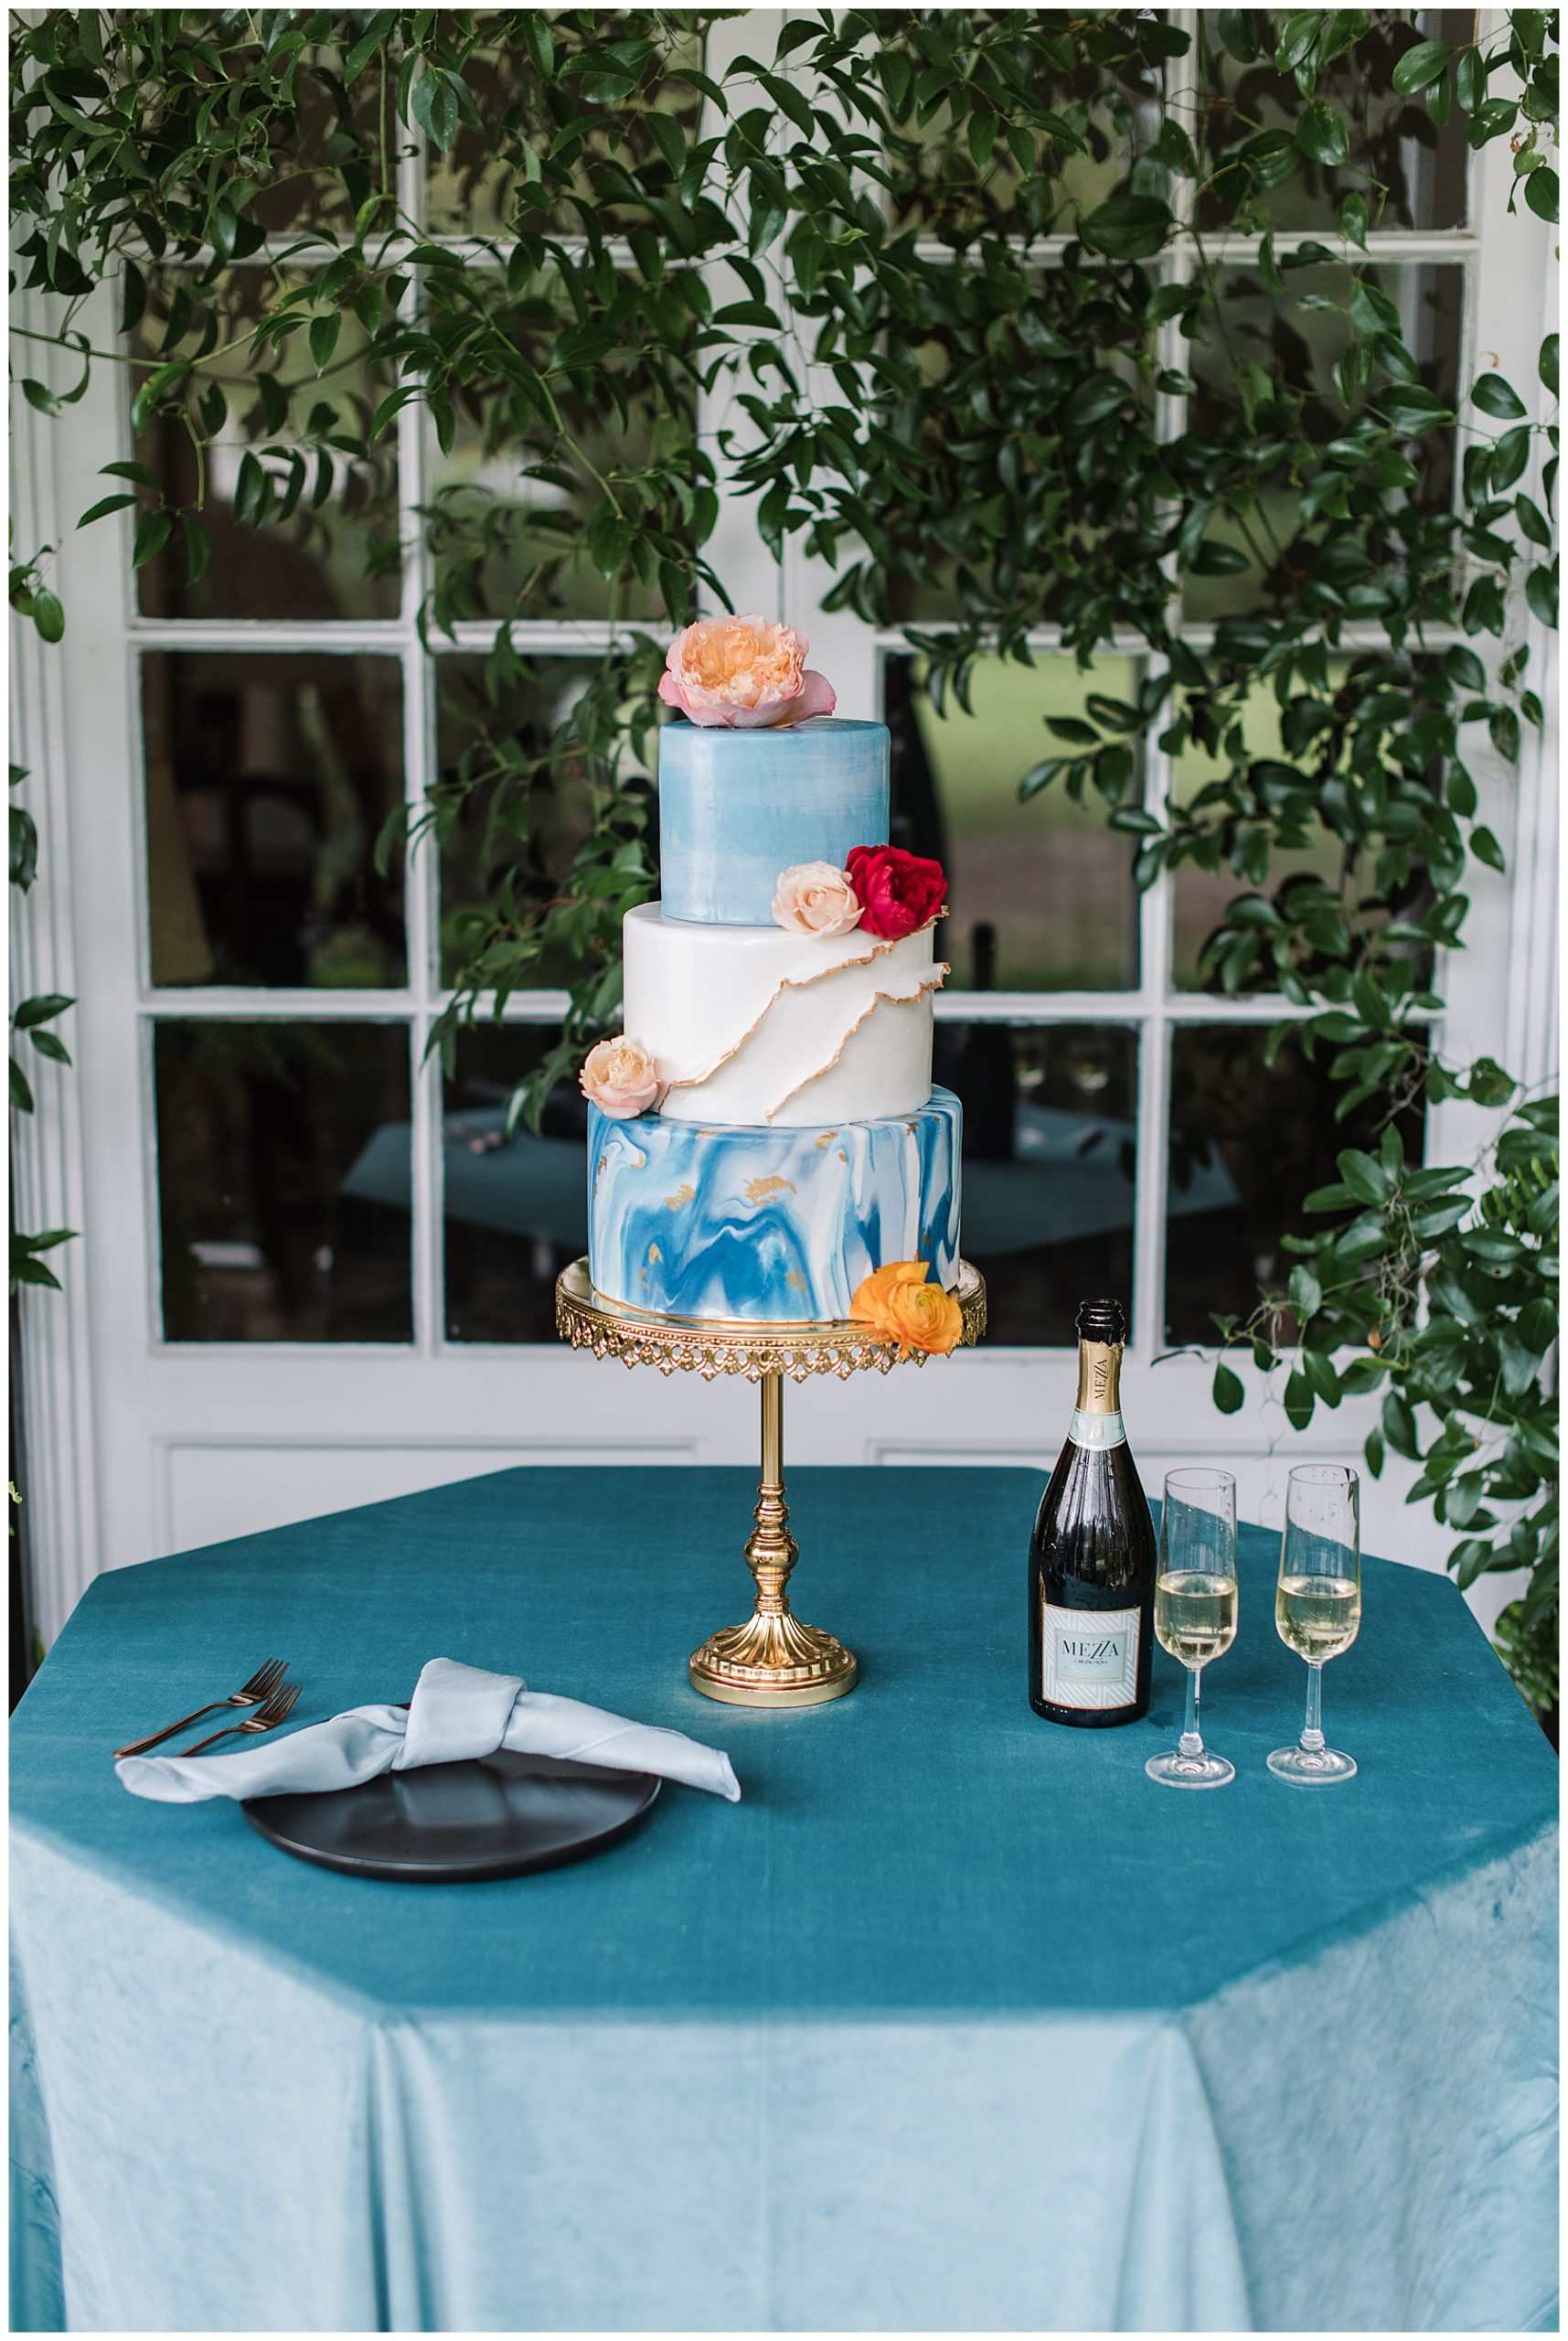 Water color wedding cake inspiration 